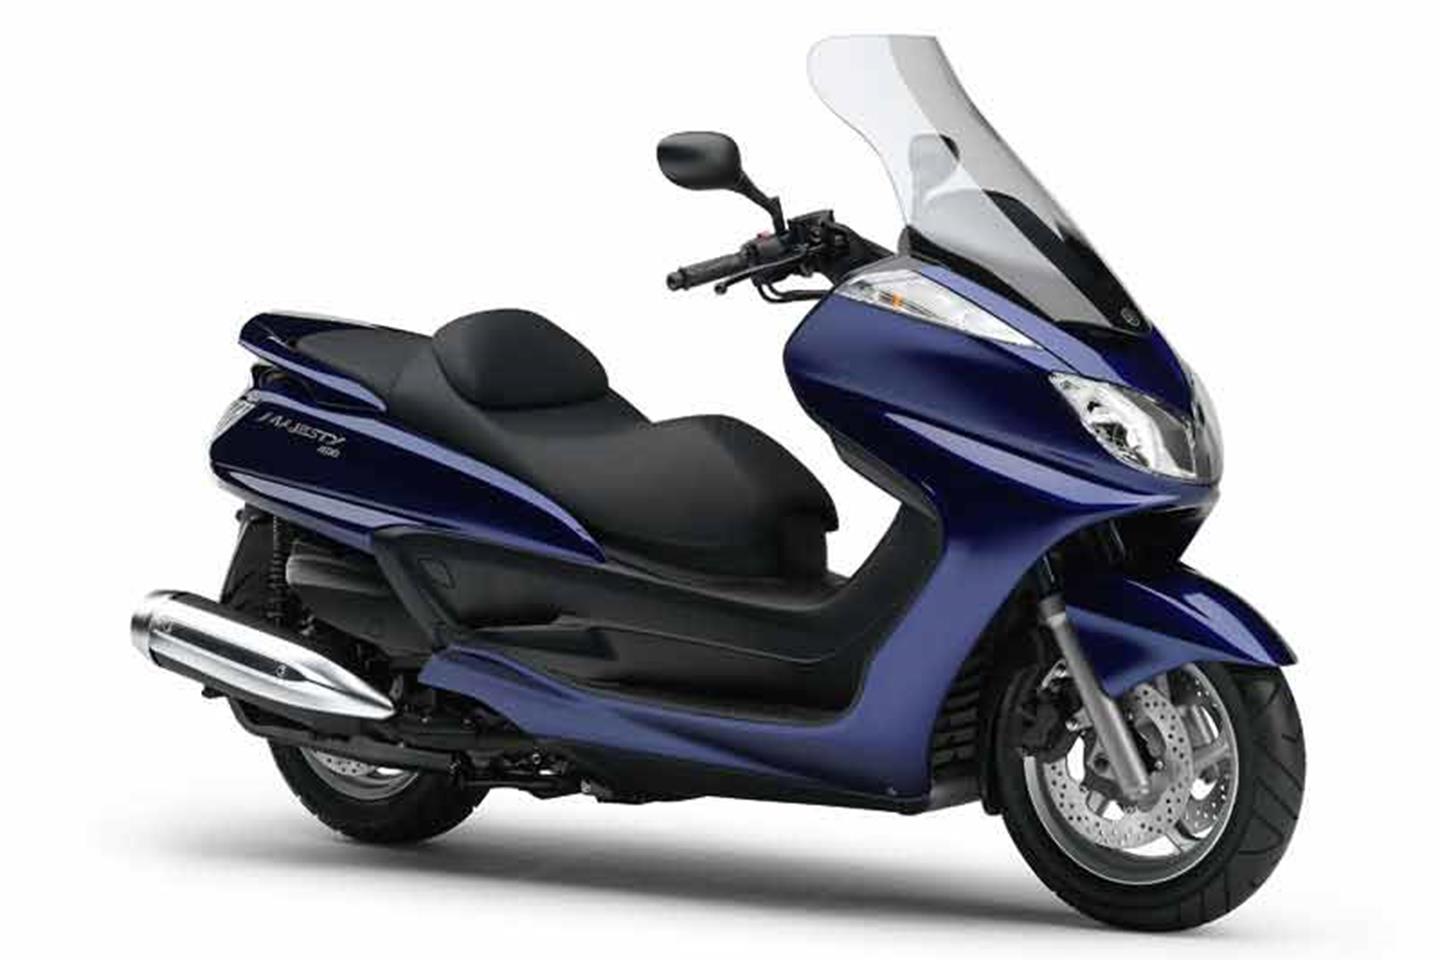 YAMAHA MAJESTY 400 (2004-on) Review | Specs & Prices